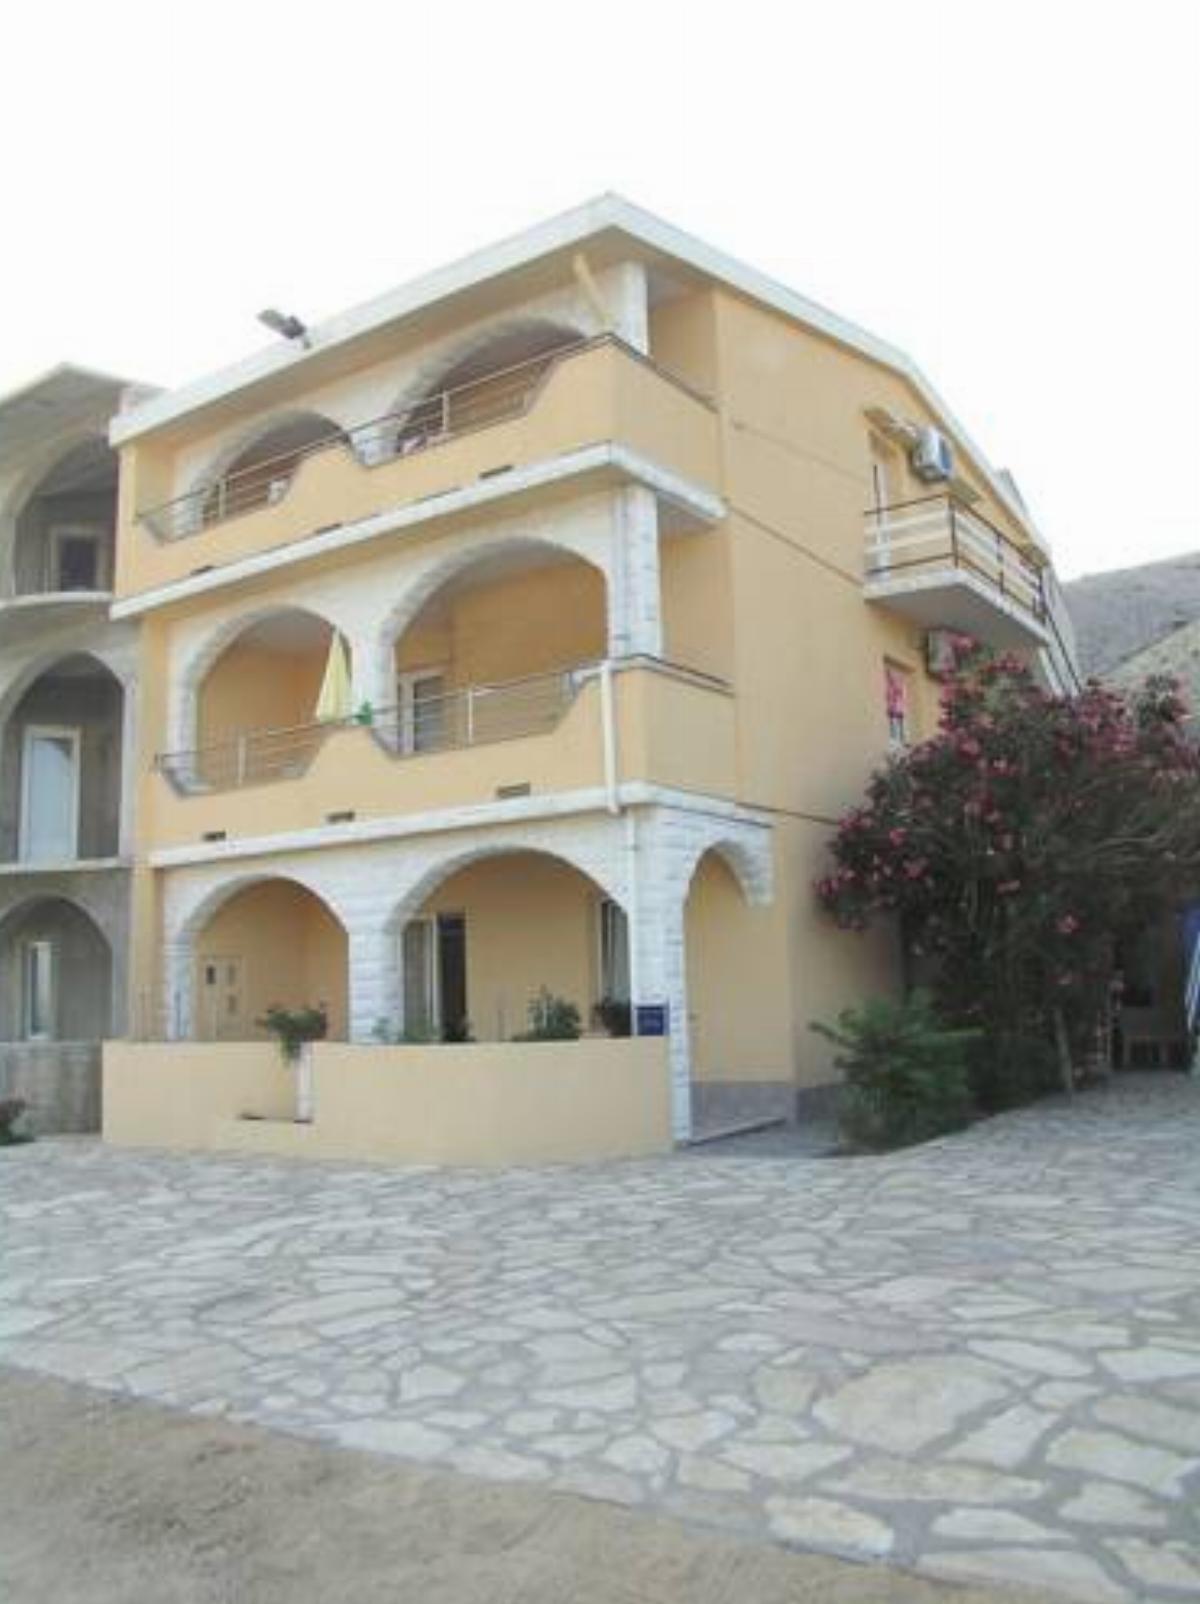 Apartment in Pag with One-Bedroom 11 Hotel Pag Croatia